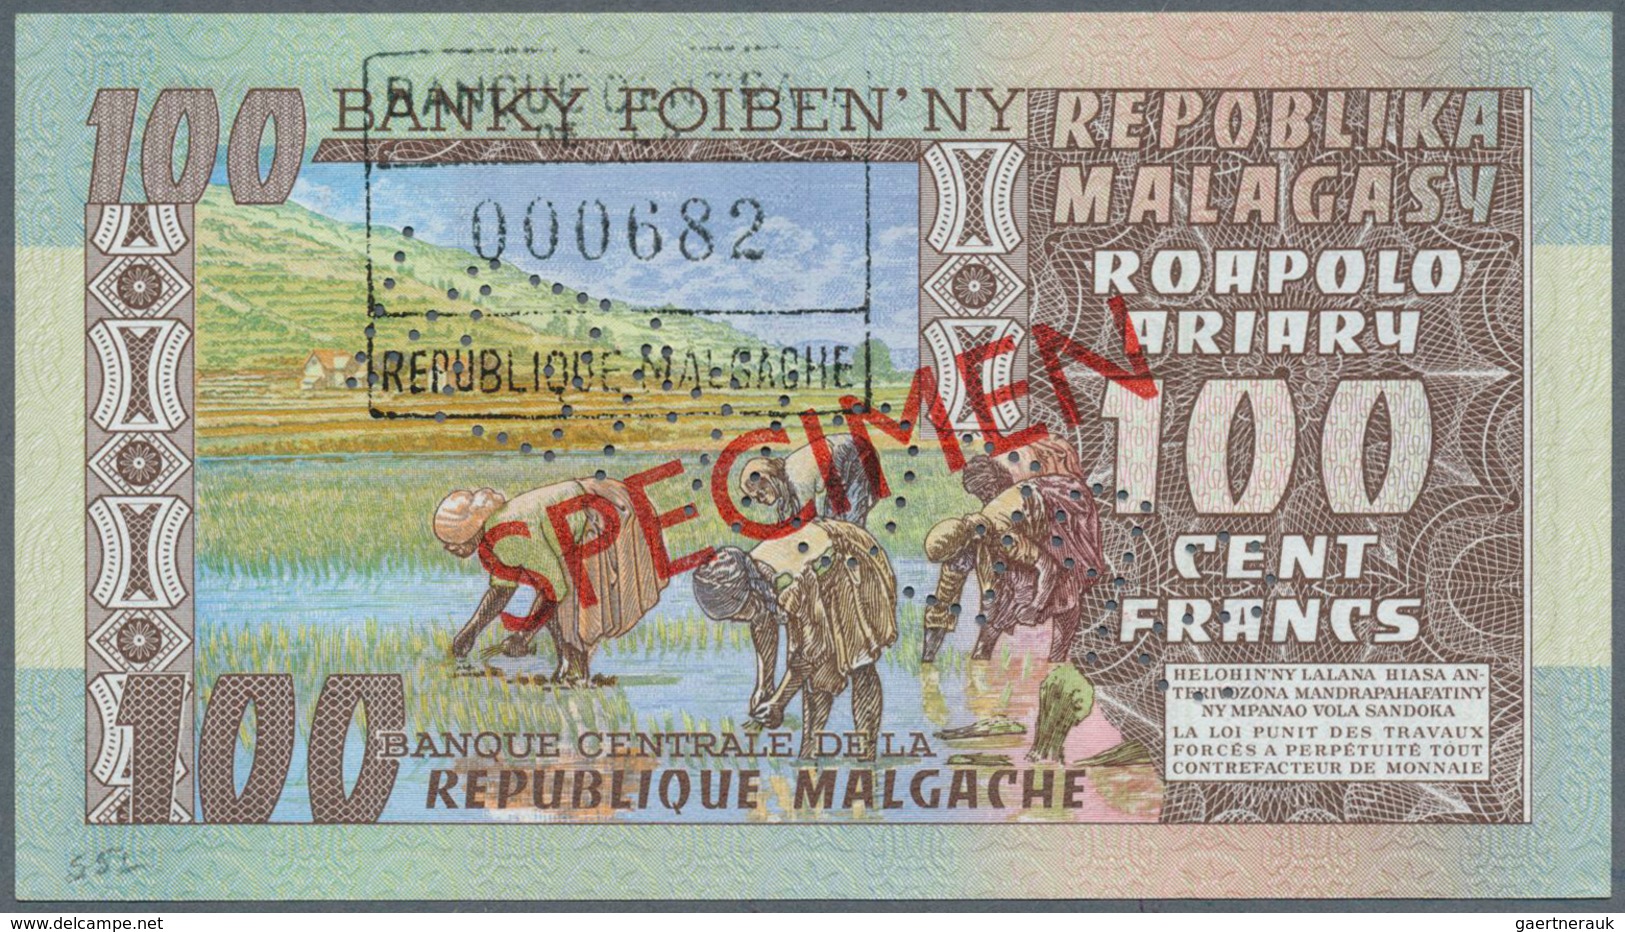 01962 Madagascar: Set Of 2 SPECIMEN Banknotes 50 And 100 Ariary P. 62s, 63s With Specimen Overprint And Sp - Madagascar